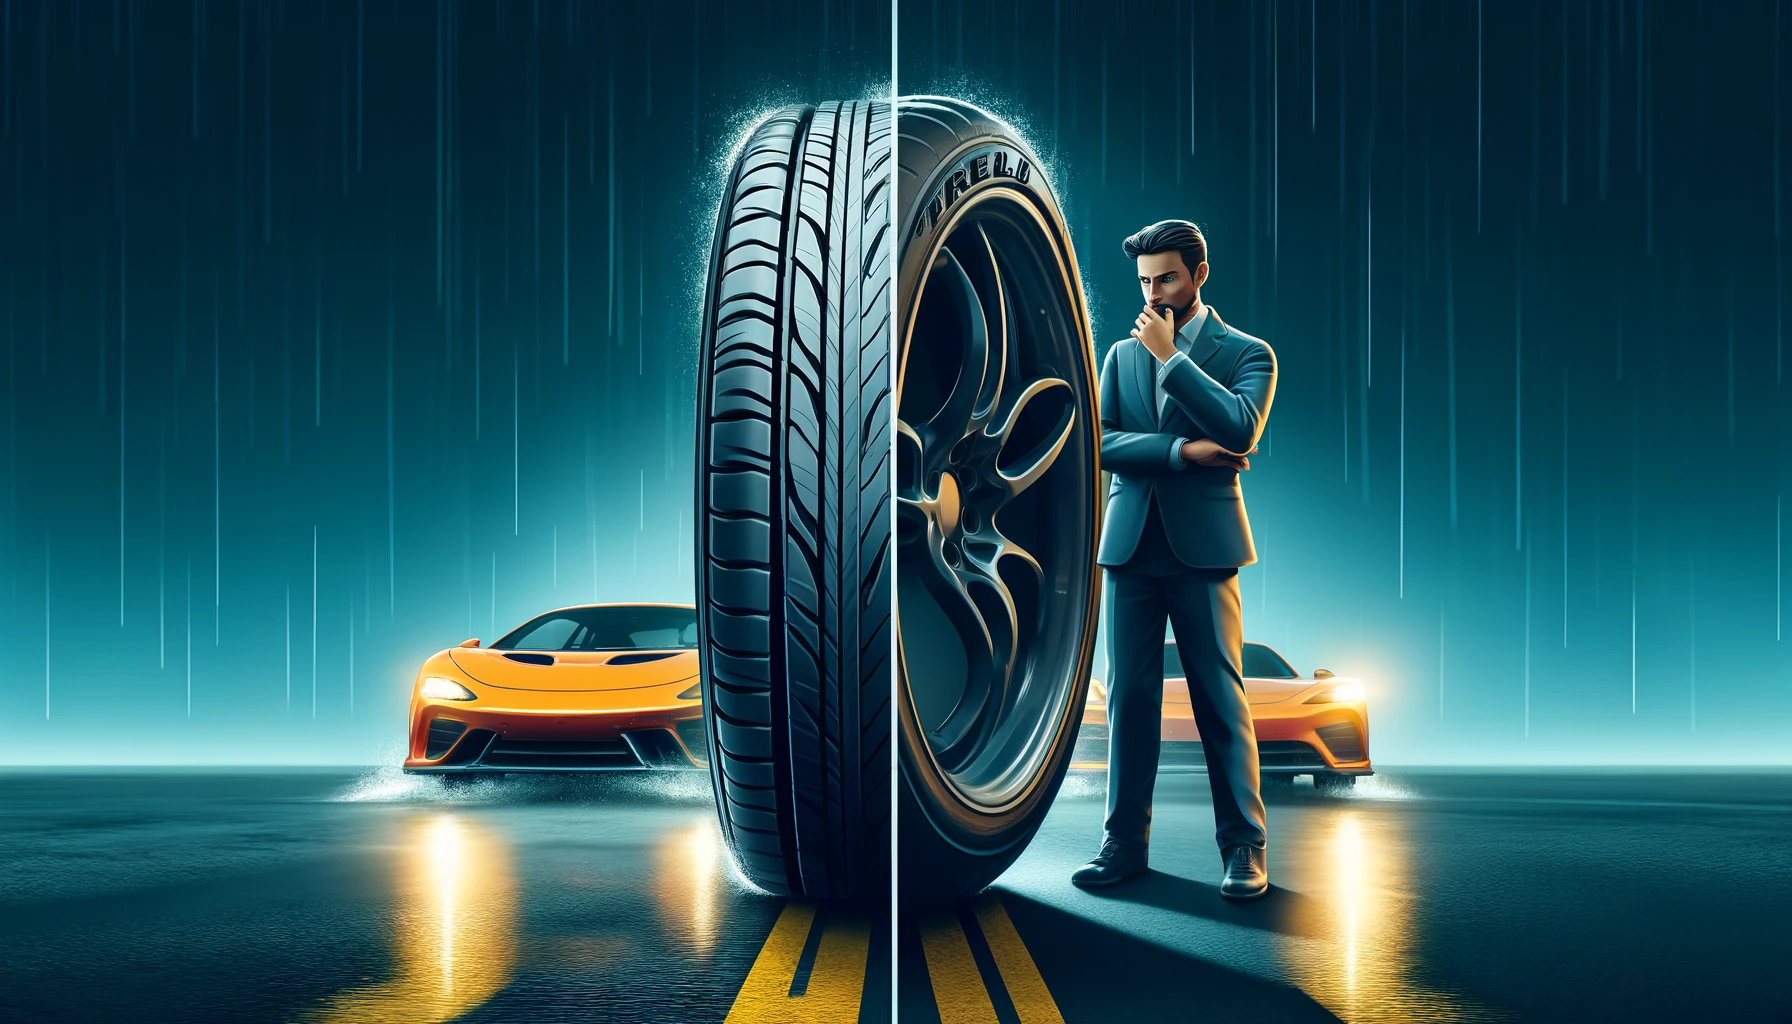 A conceptual split-image illustrating both the advantages and disadvantages of Pirelli tires. On the left side, a high-performance car equipped with Pirelli tires confidently maneuvers on a wet road, showcasing the tires' excellent grip and safety features. On the right side, a car owner looks concerned while examining a Pirelli tire, representing the high cost or wear issues. This side shows a close-up of the tire tread, possibly worn, indicating potential drawbacks such as higher replacement costs. The image reflects a balanced view of the pros and cons of using Pirelli tires. The image is in a 16:9 aspect ratio.